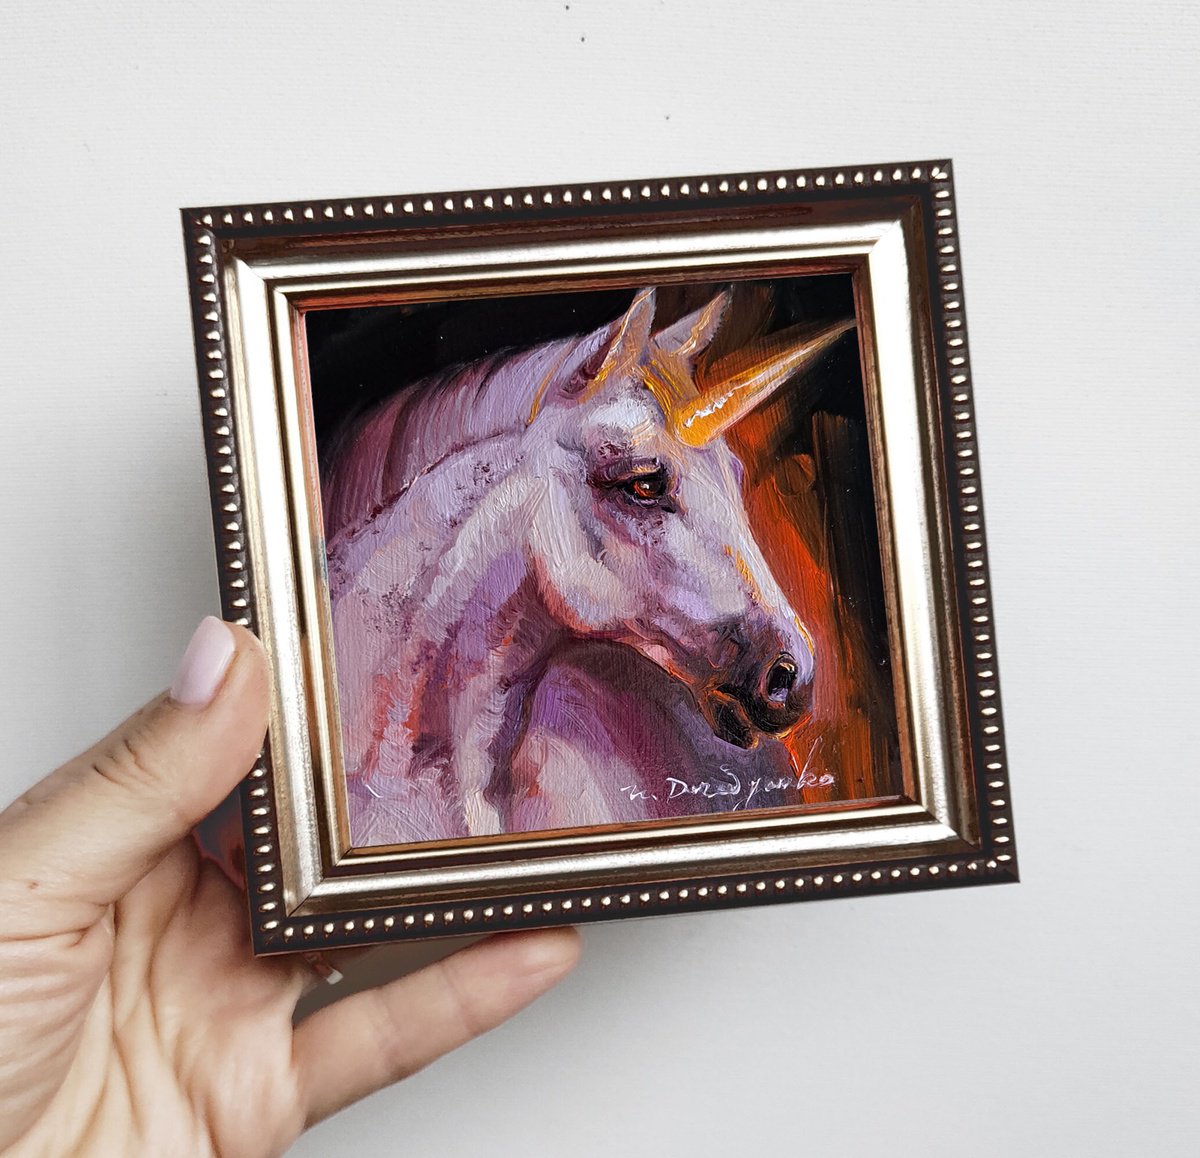 White unicorn oil painting original in silver frame 4x4 inch by Nataly Derevyanko